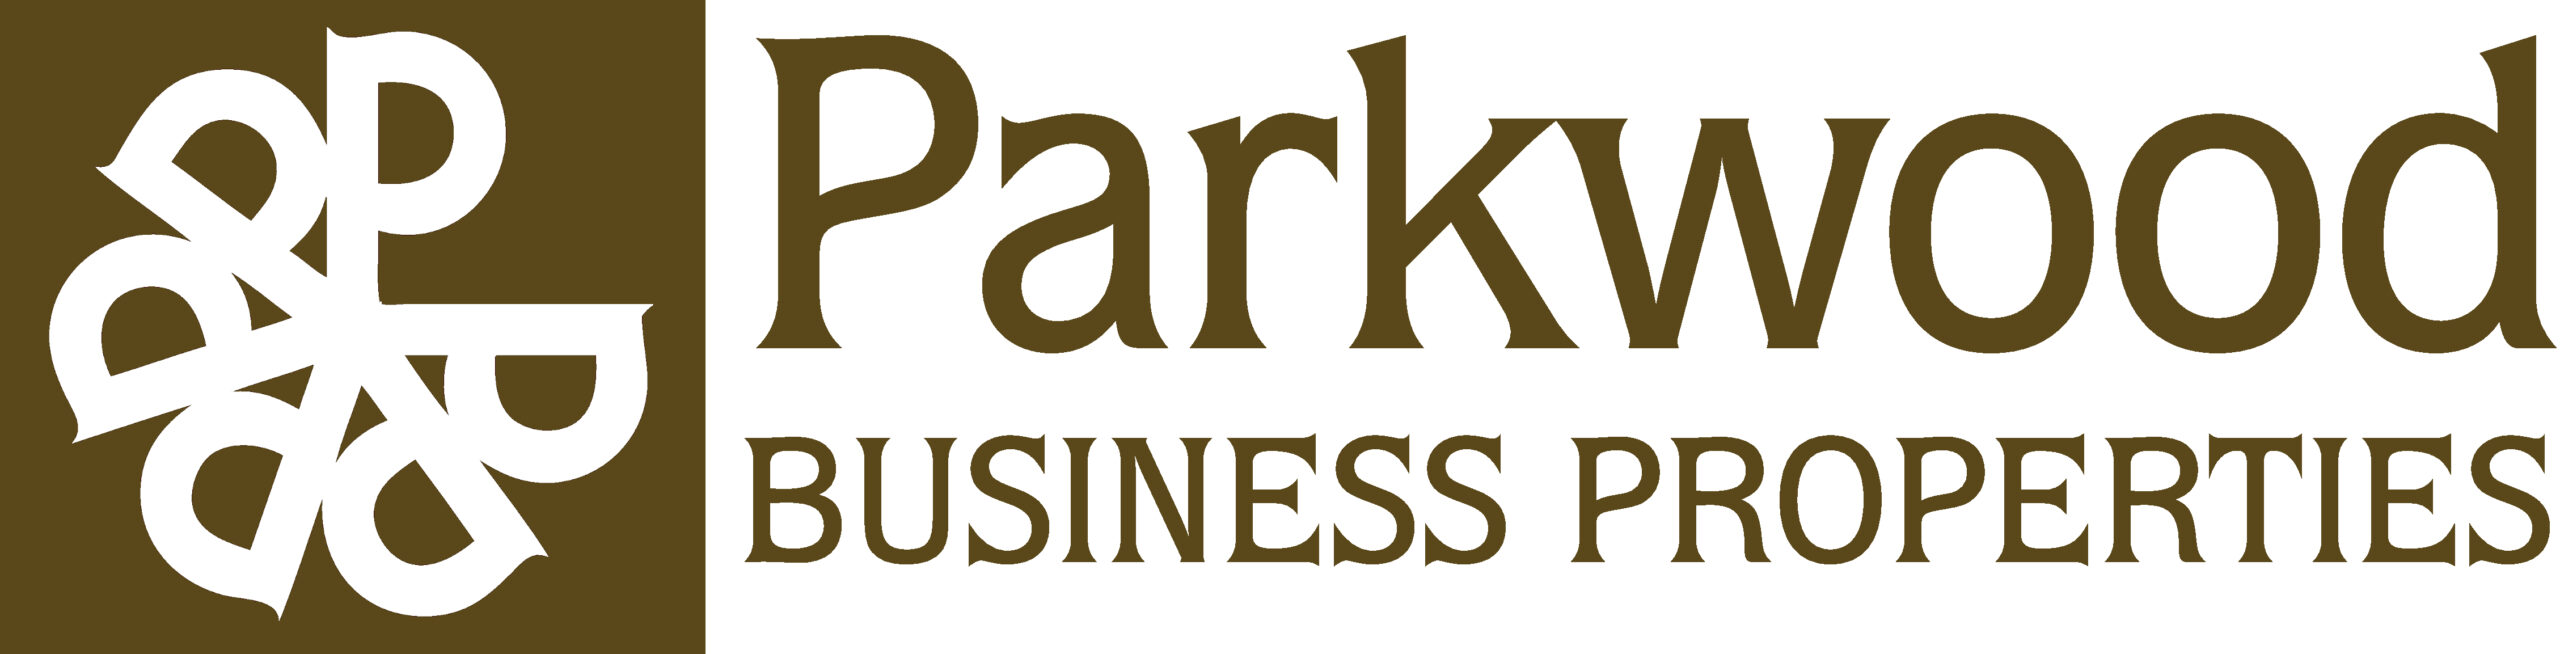 Parkwood Business Properties | High quality commercial real estate in Coeur  d'Alene, Hayden, and Post Falls, Idaho.